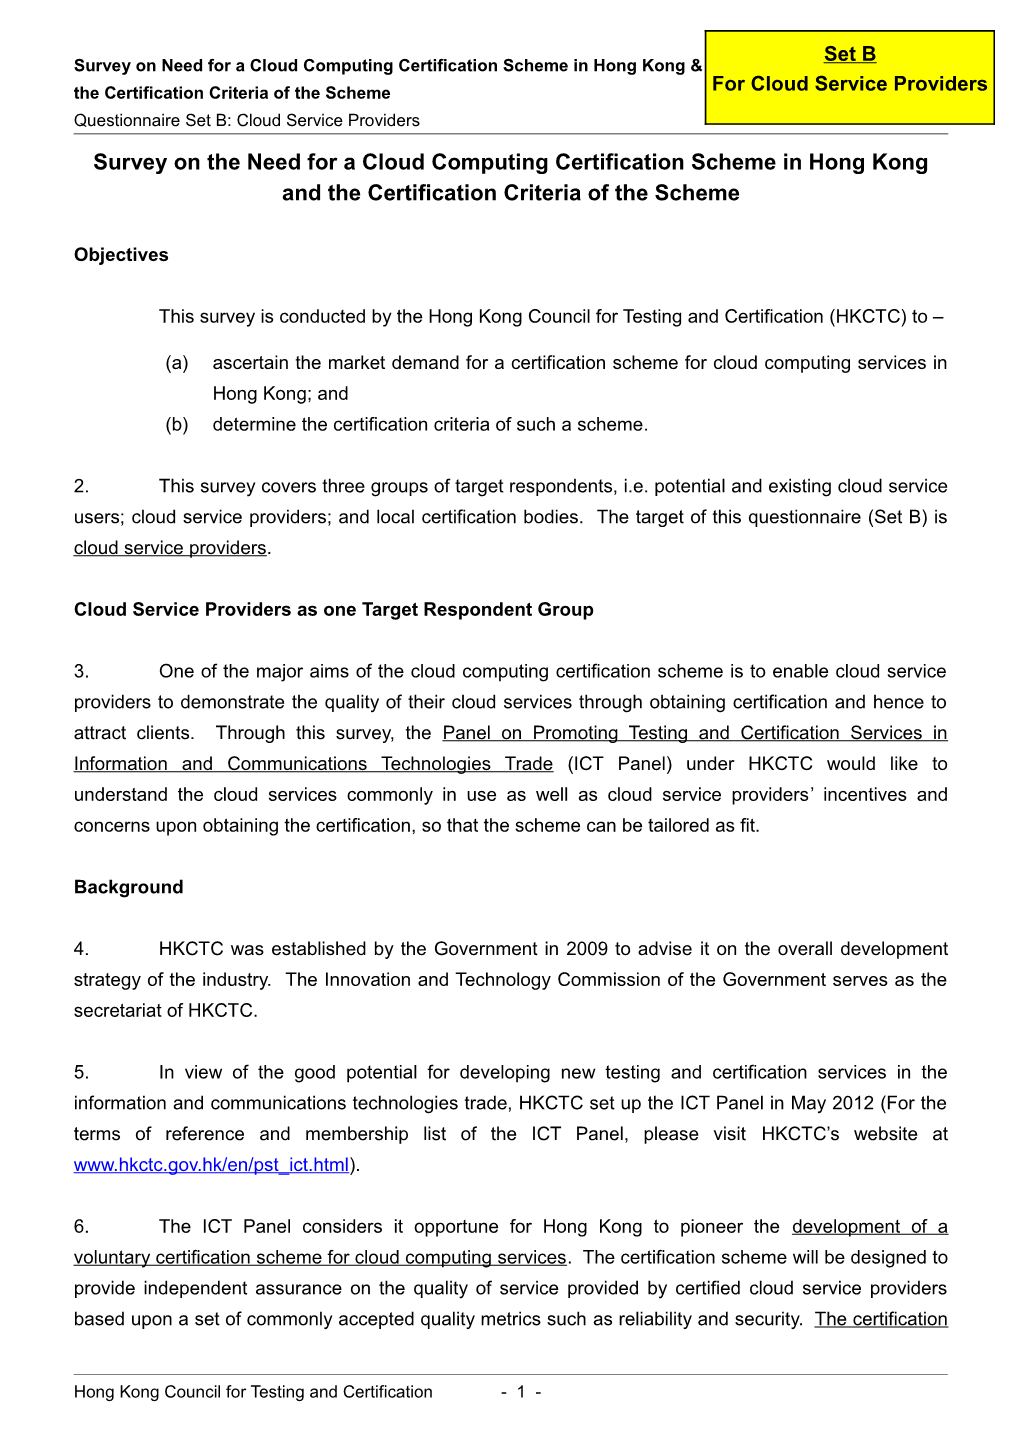 Survey on Need for a Cloud Computing Certification Scheme in Hong Kong